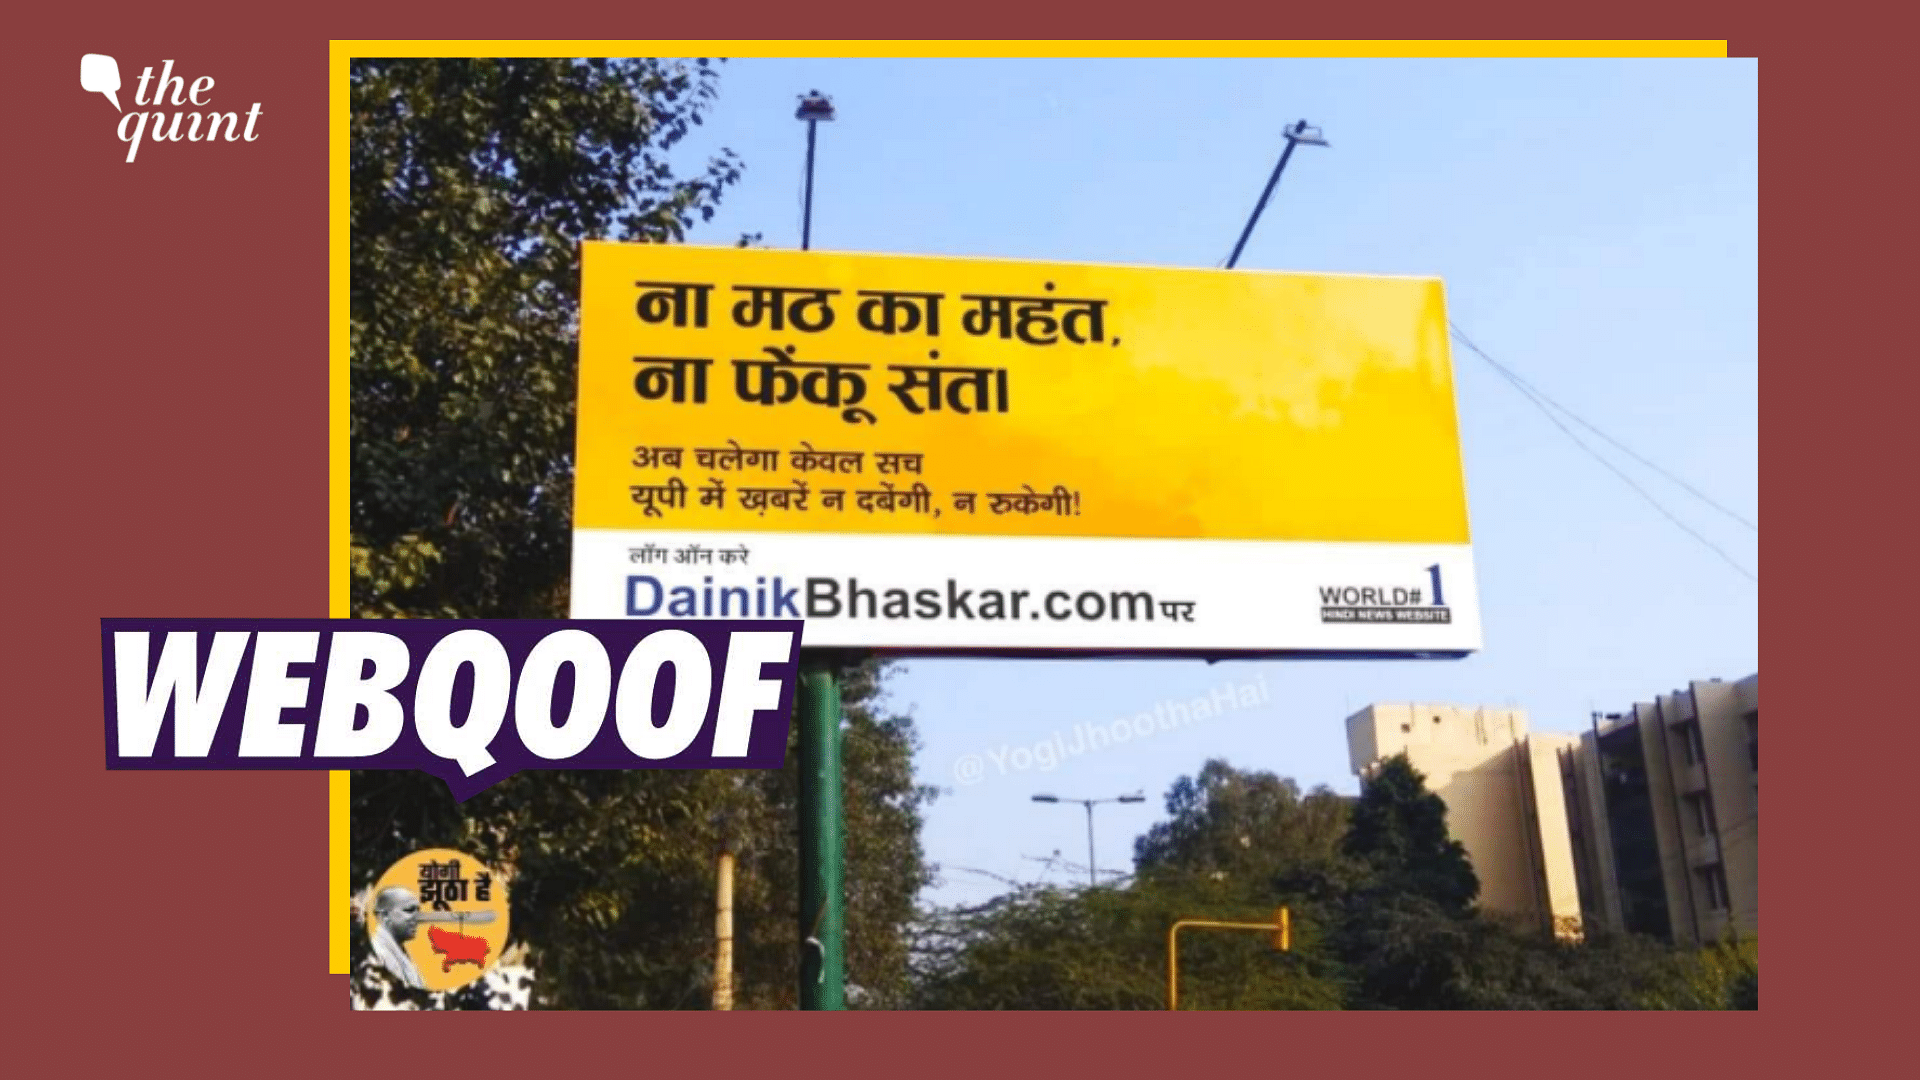 <div class="paragraphs"><p>Fact-Check |&nbsp;We found that the viral image had been morphed over an old hoarding and shared with the viral claim about Dainik Bhaskar.</p></div>